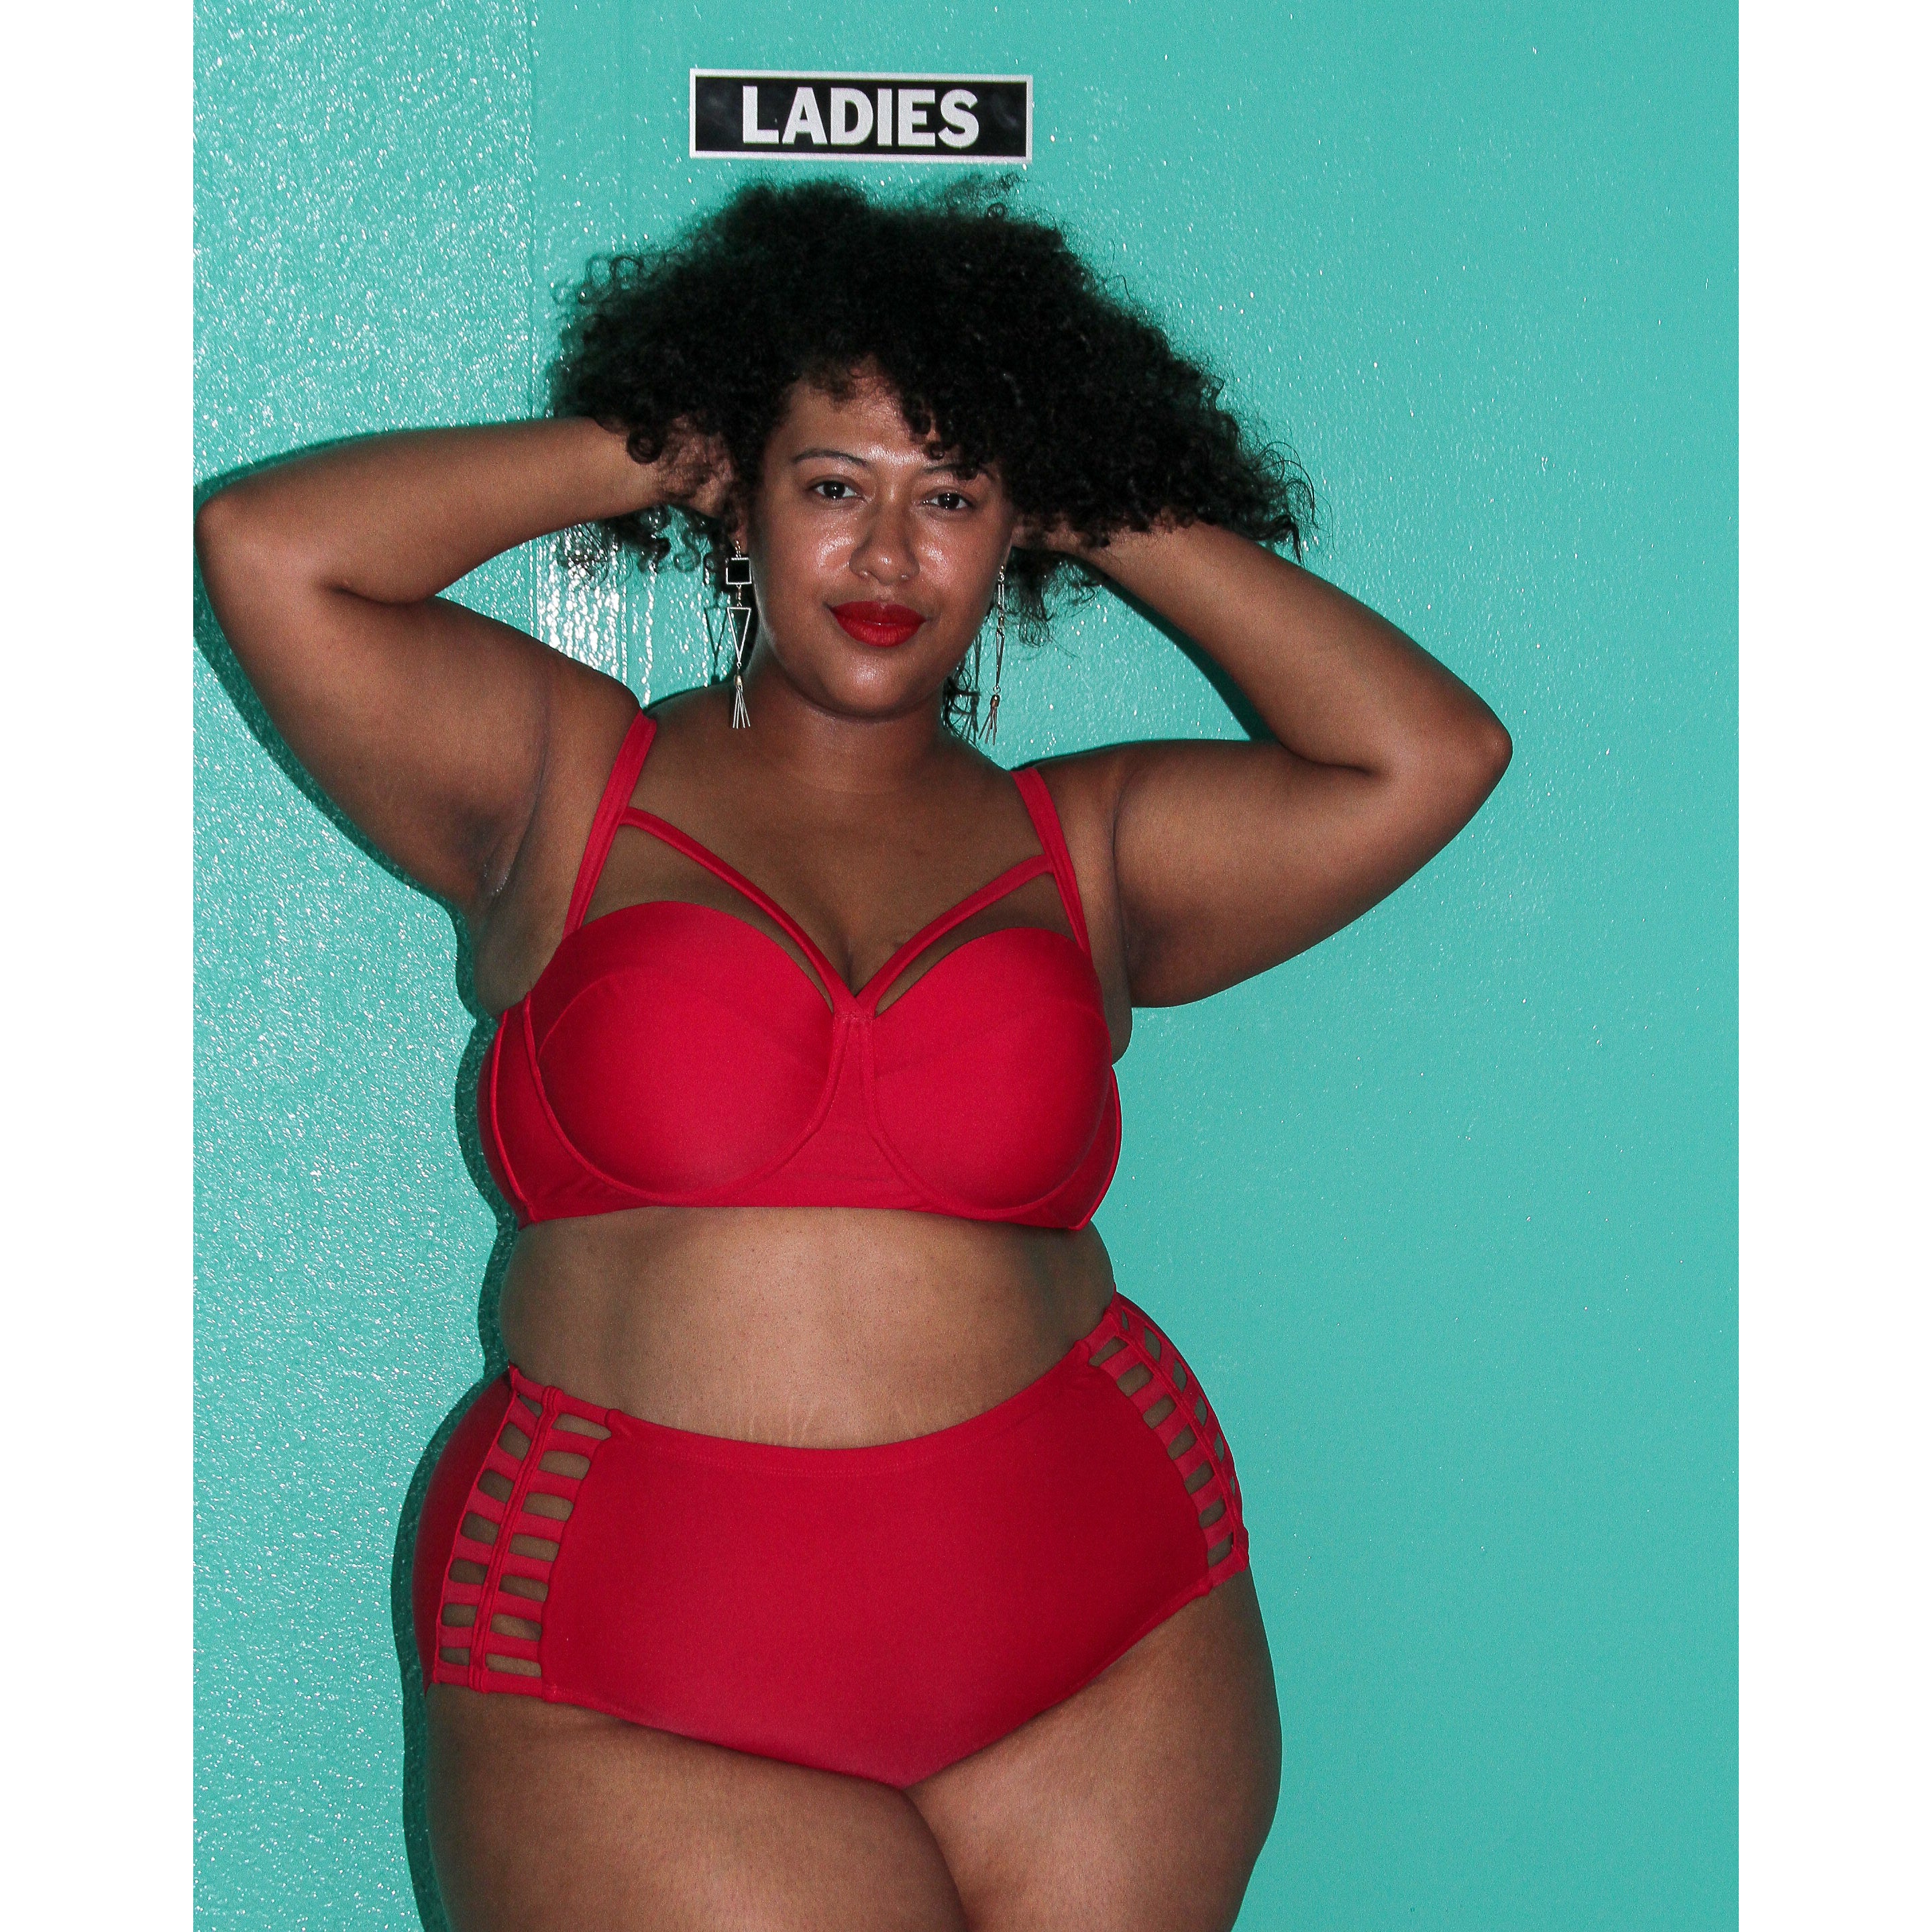 Curvy Girls Shut It Down at the Golden Confidence Pool Party
